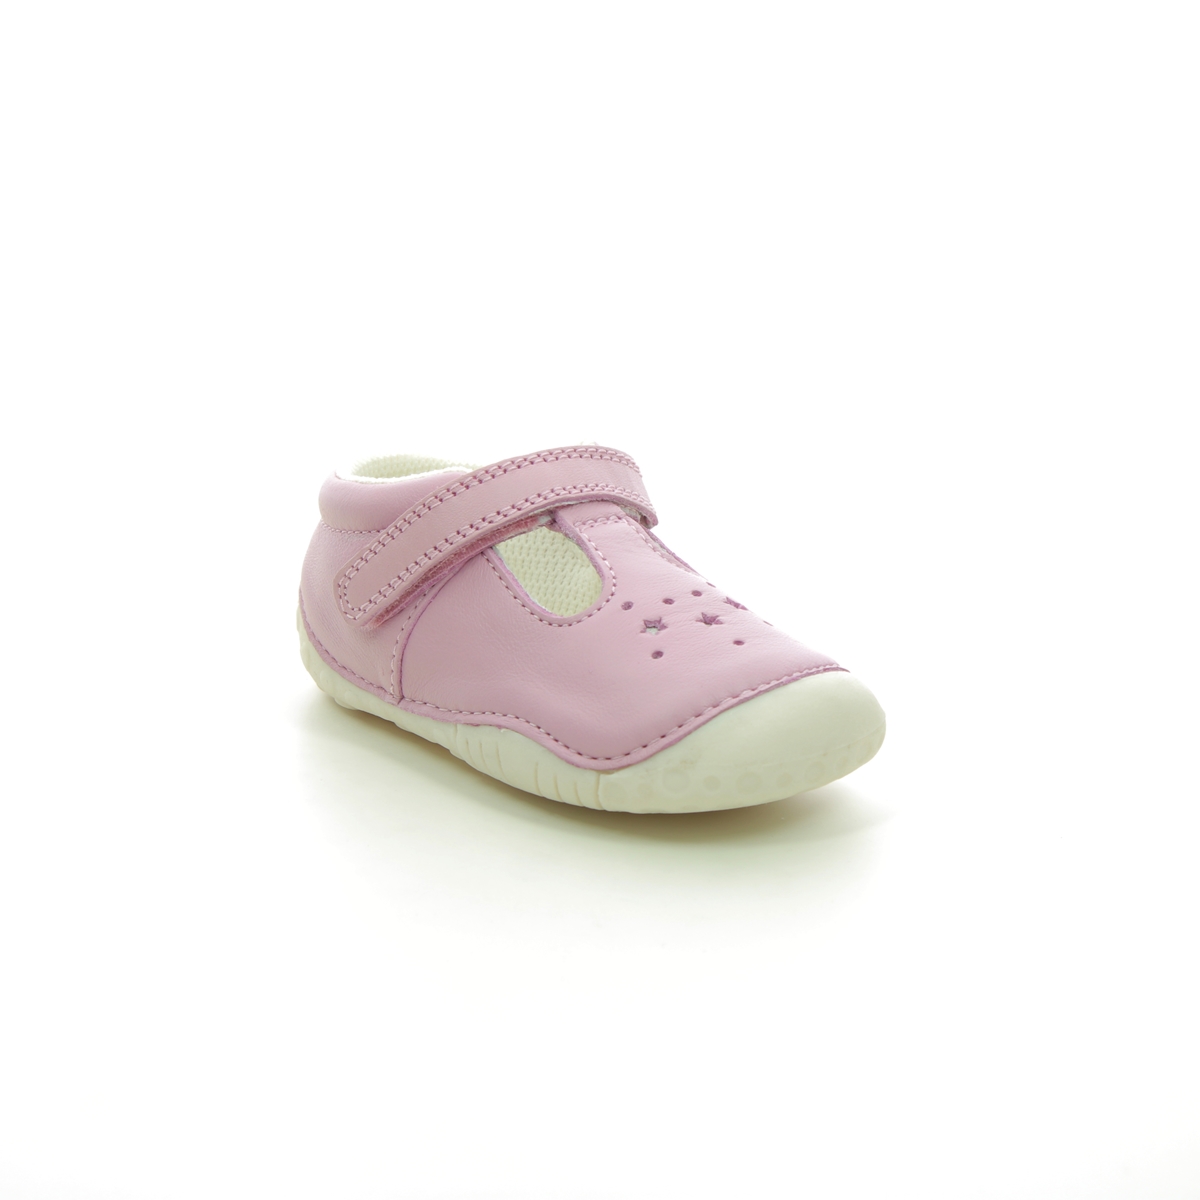 Start Rite - Tumble T Bar In Pink Leather 0761-67G In Size 4 In Plain Pink Leather First And Baby Shoes  In Pink Leather For kids